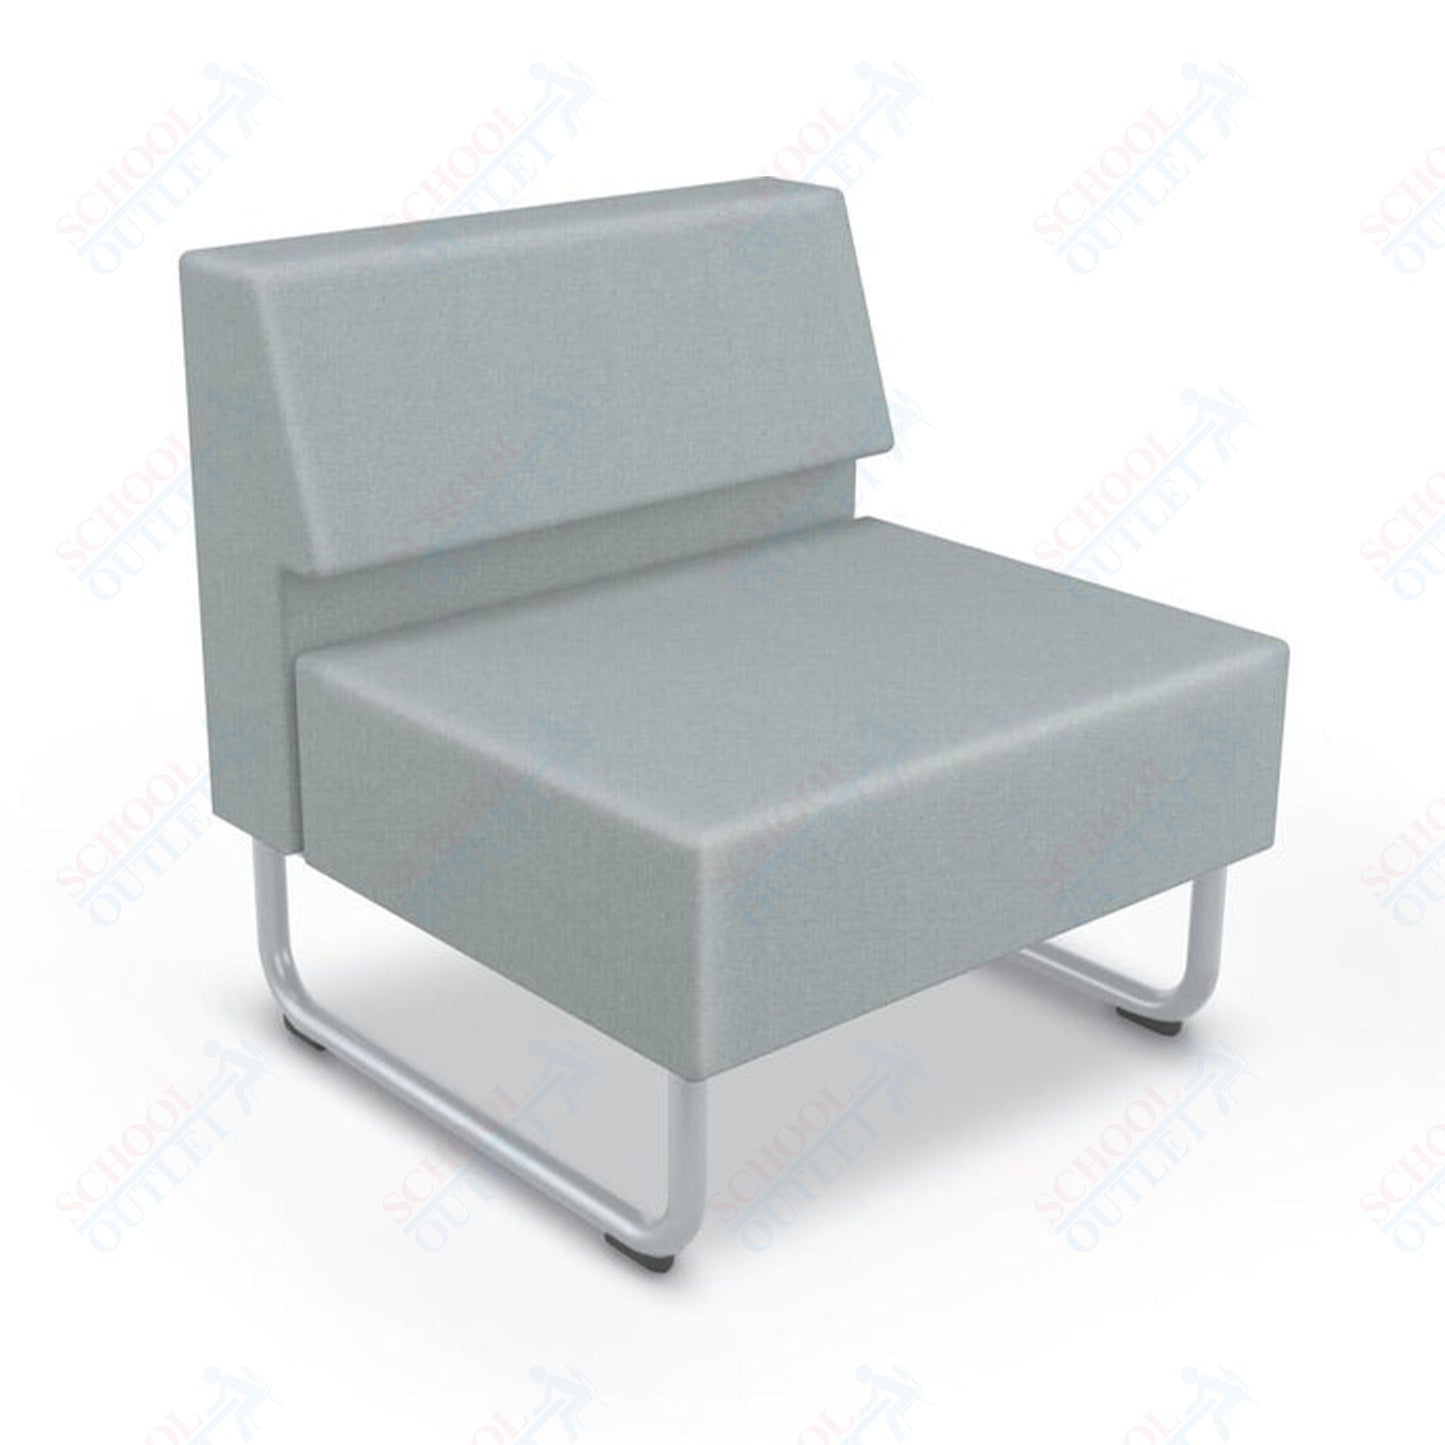 Mooreco Akt Soft Seating Lounge Chair - Armless - Grade 02 Fabric and Powder Coated Sled Legs